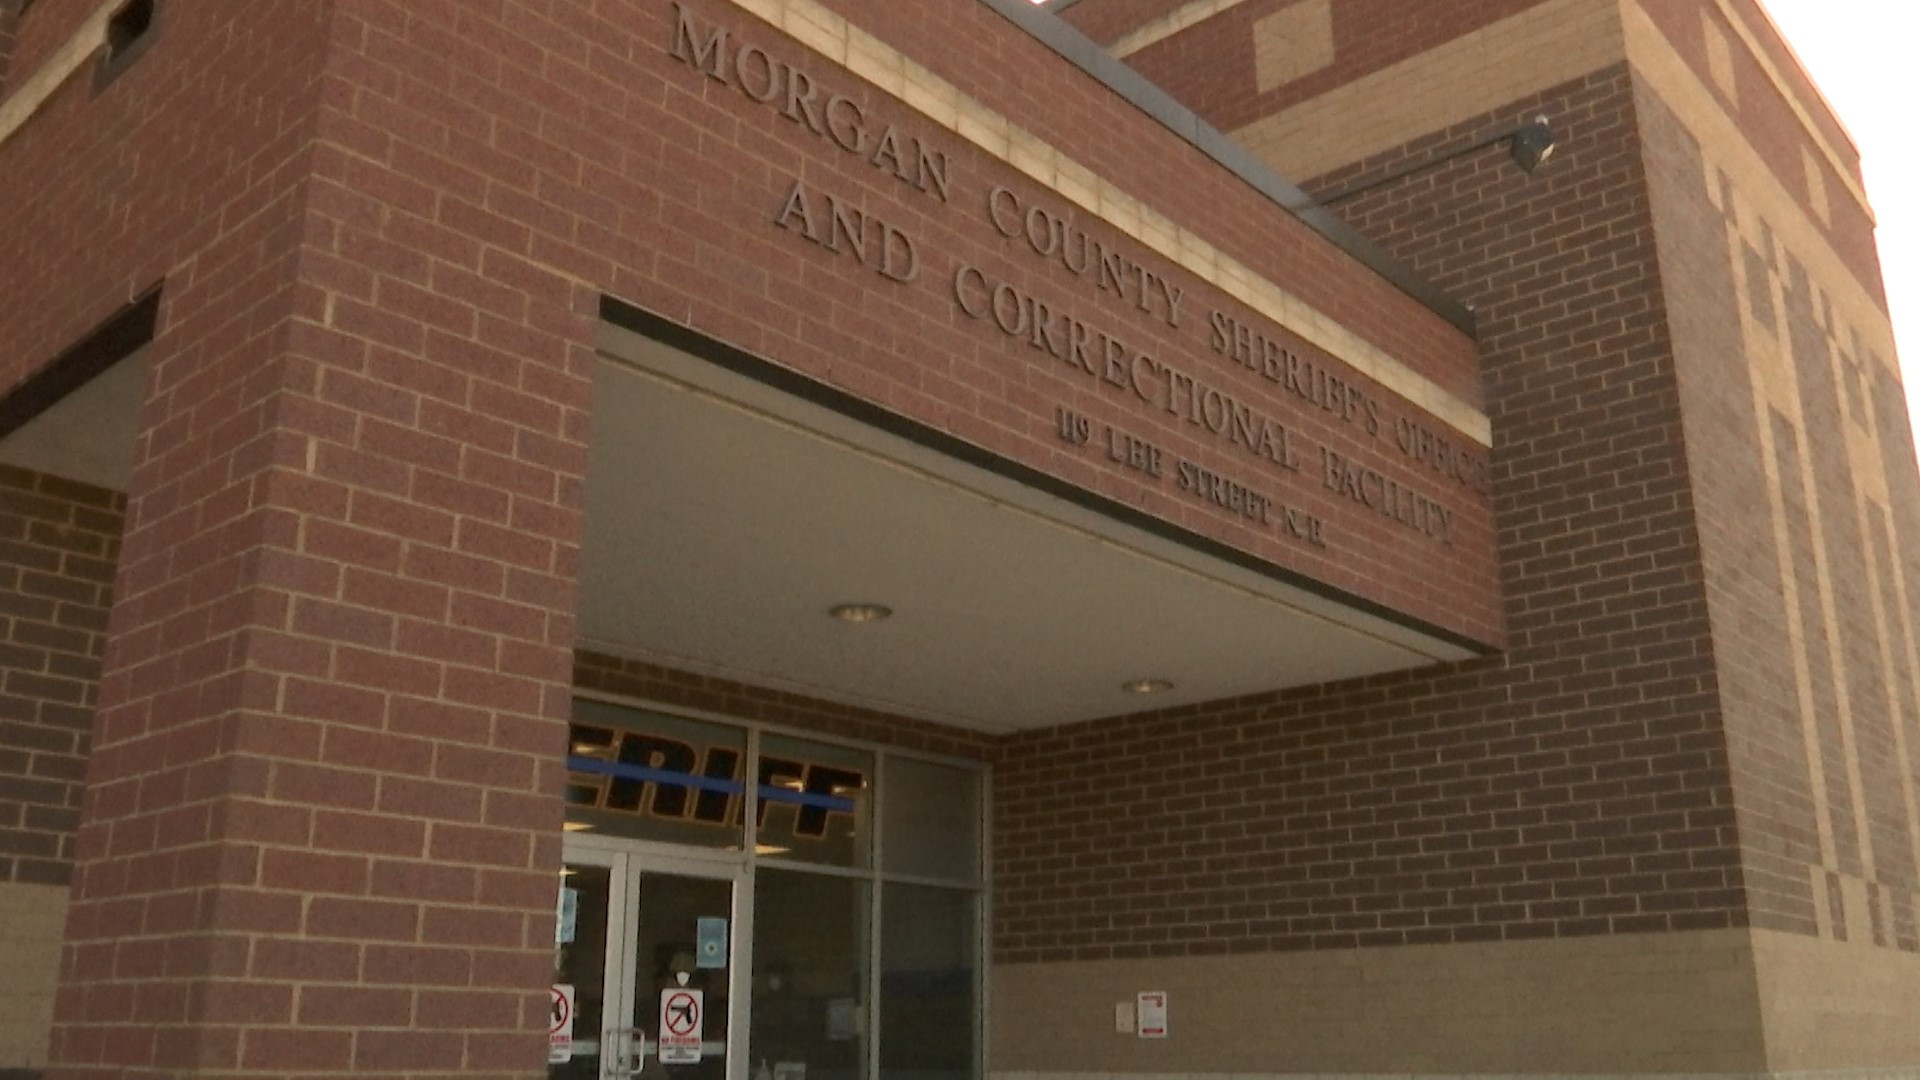 The Morgan County Sheriff's Office says their concealed carry applications went up to 72.5% last year in compared to 2019.